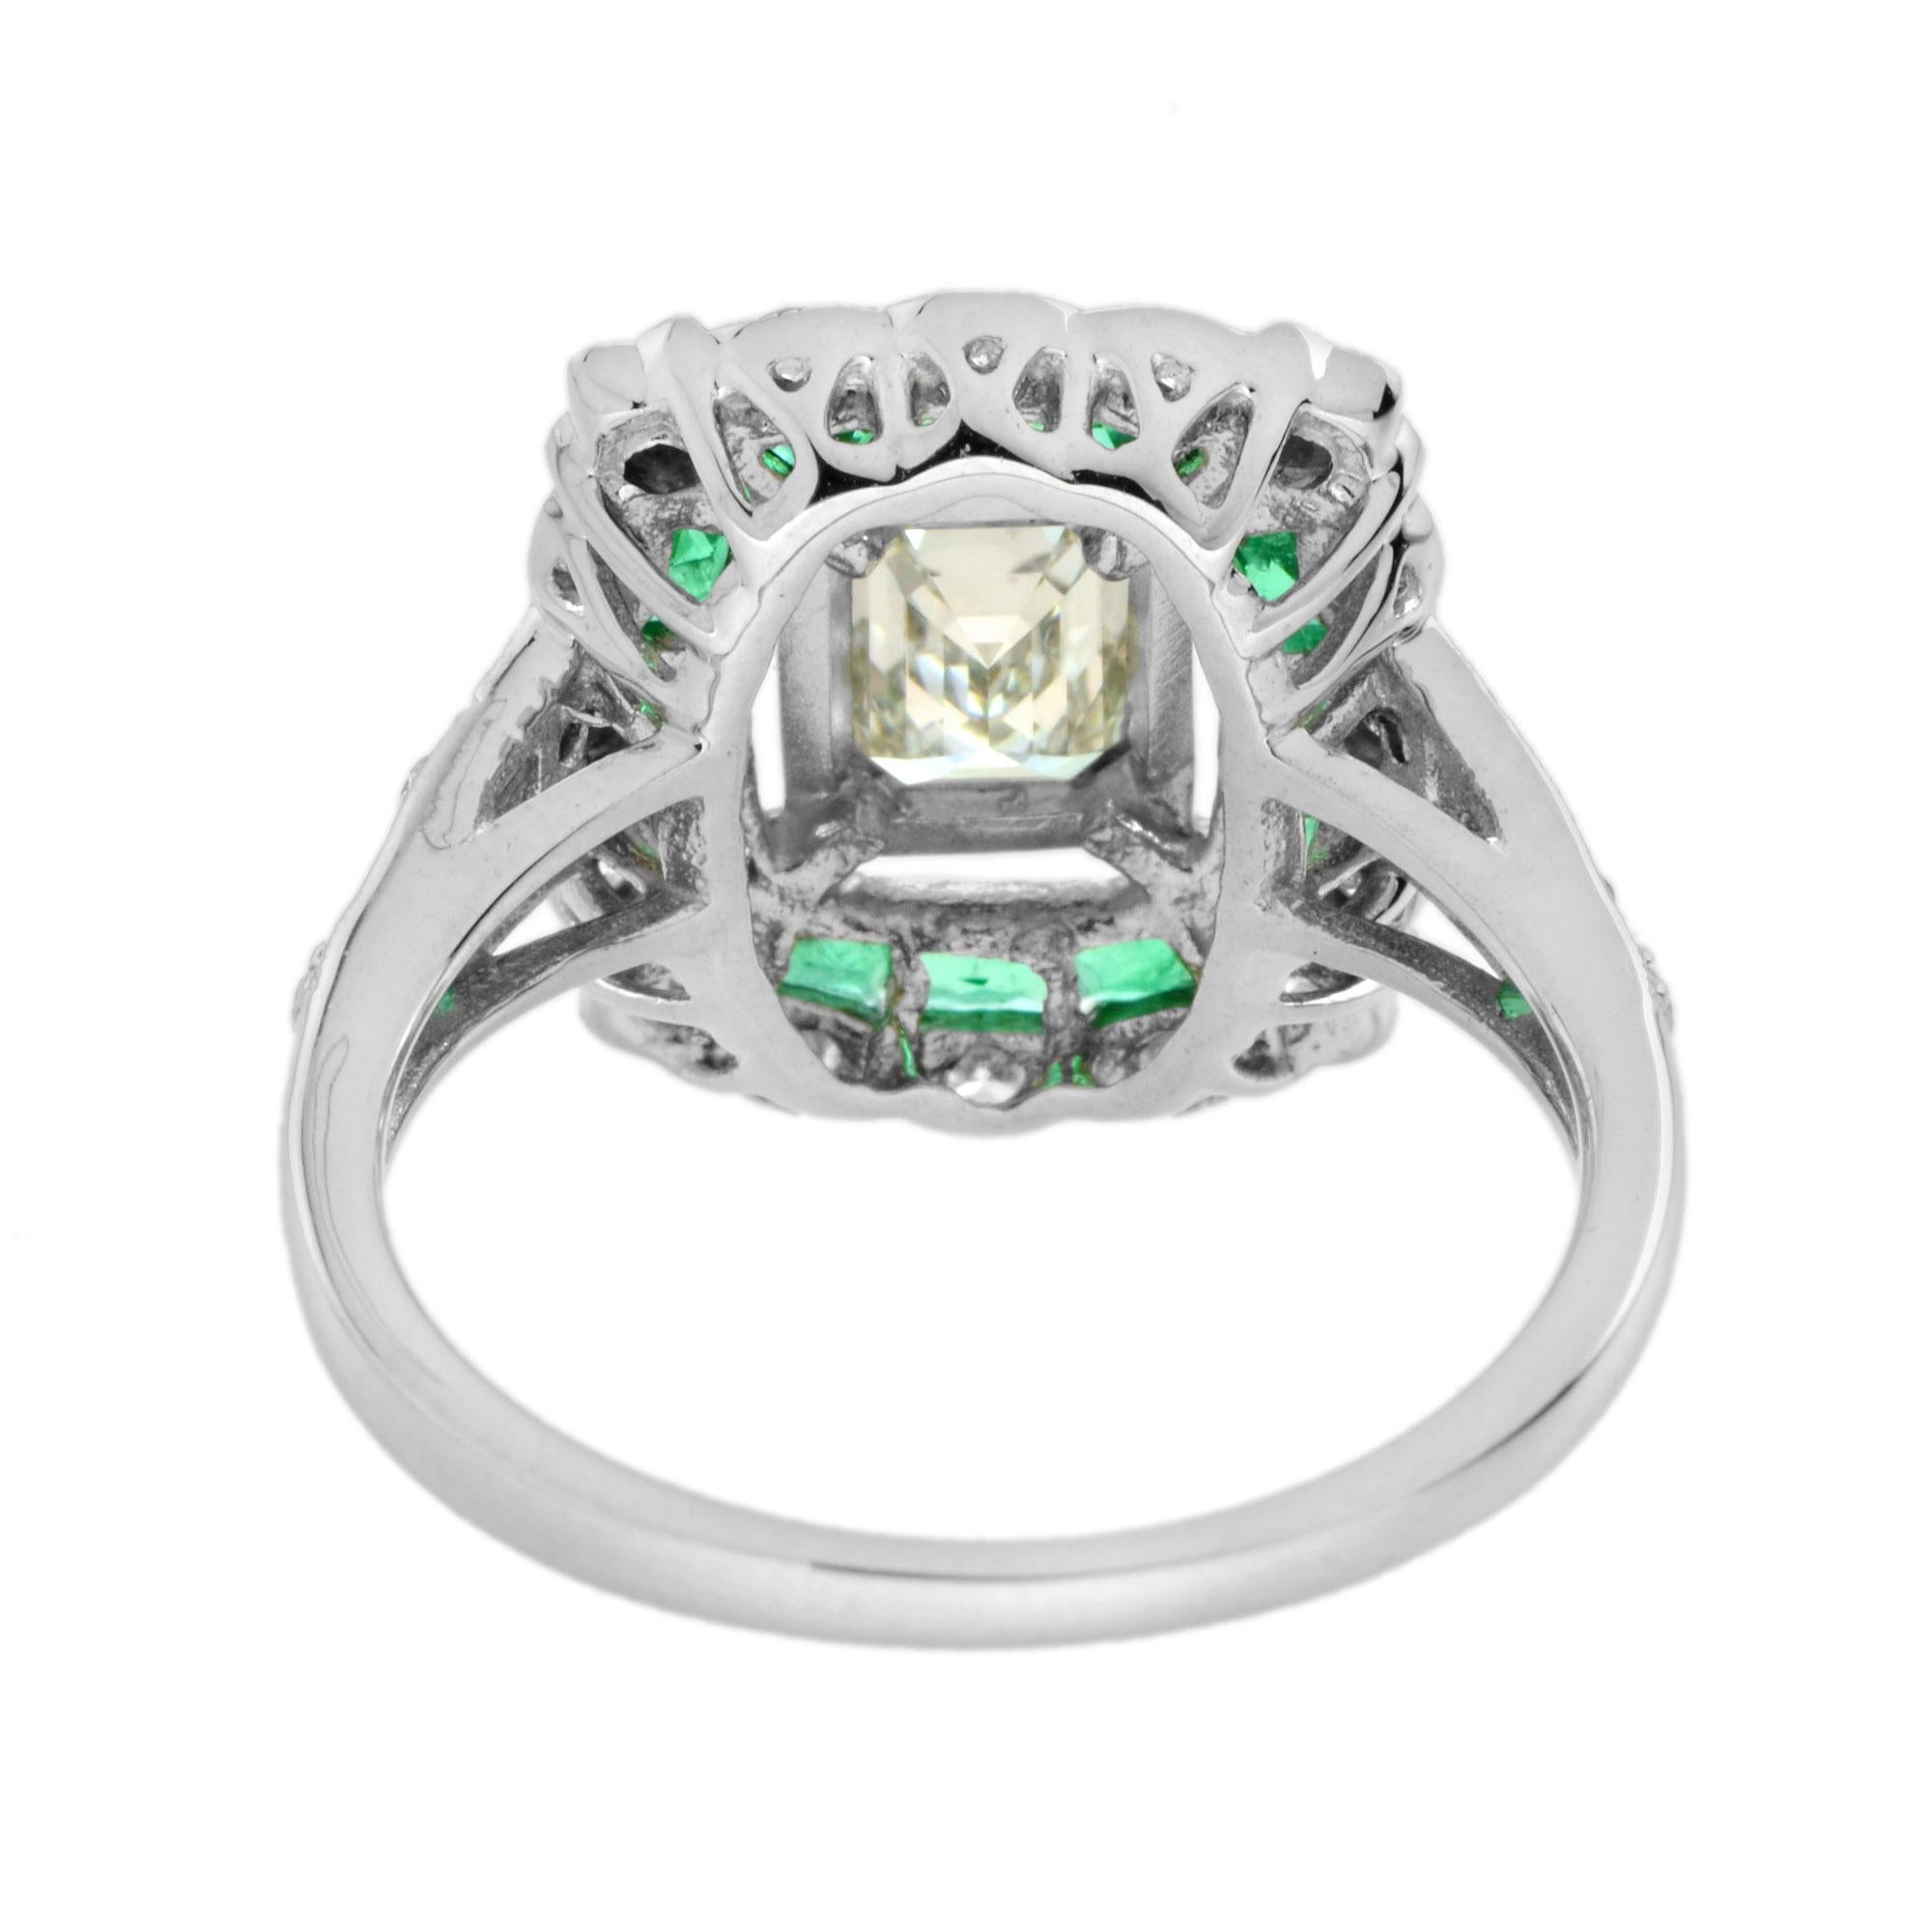 GIA Emerald Cut Diamond Emerald Art Deco Style Engagement Ring in 18k Gold For Sale 2